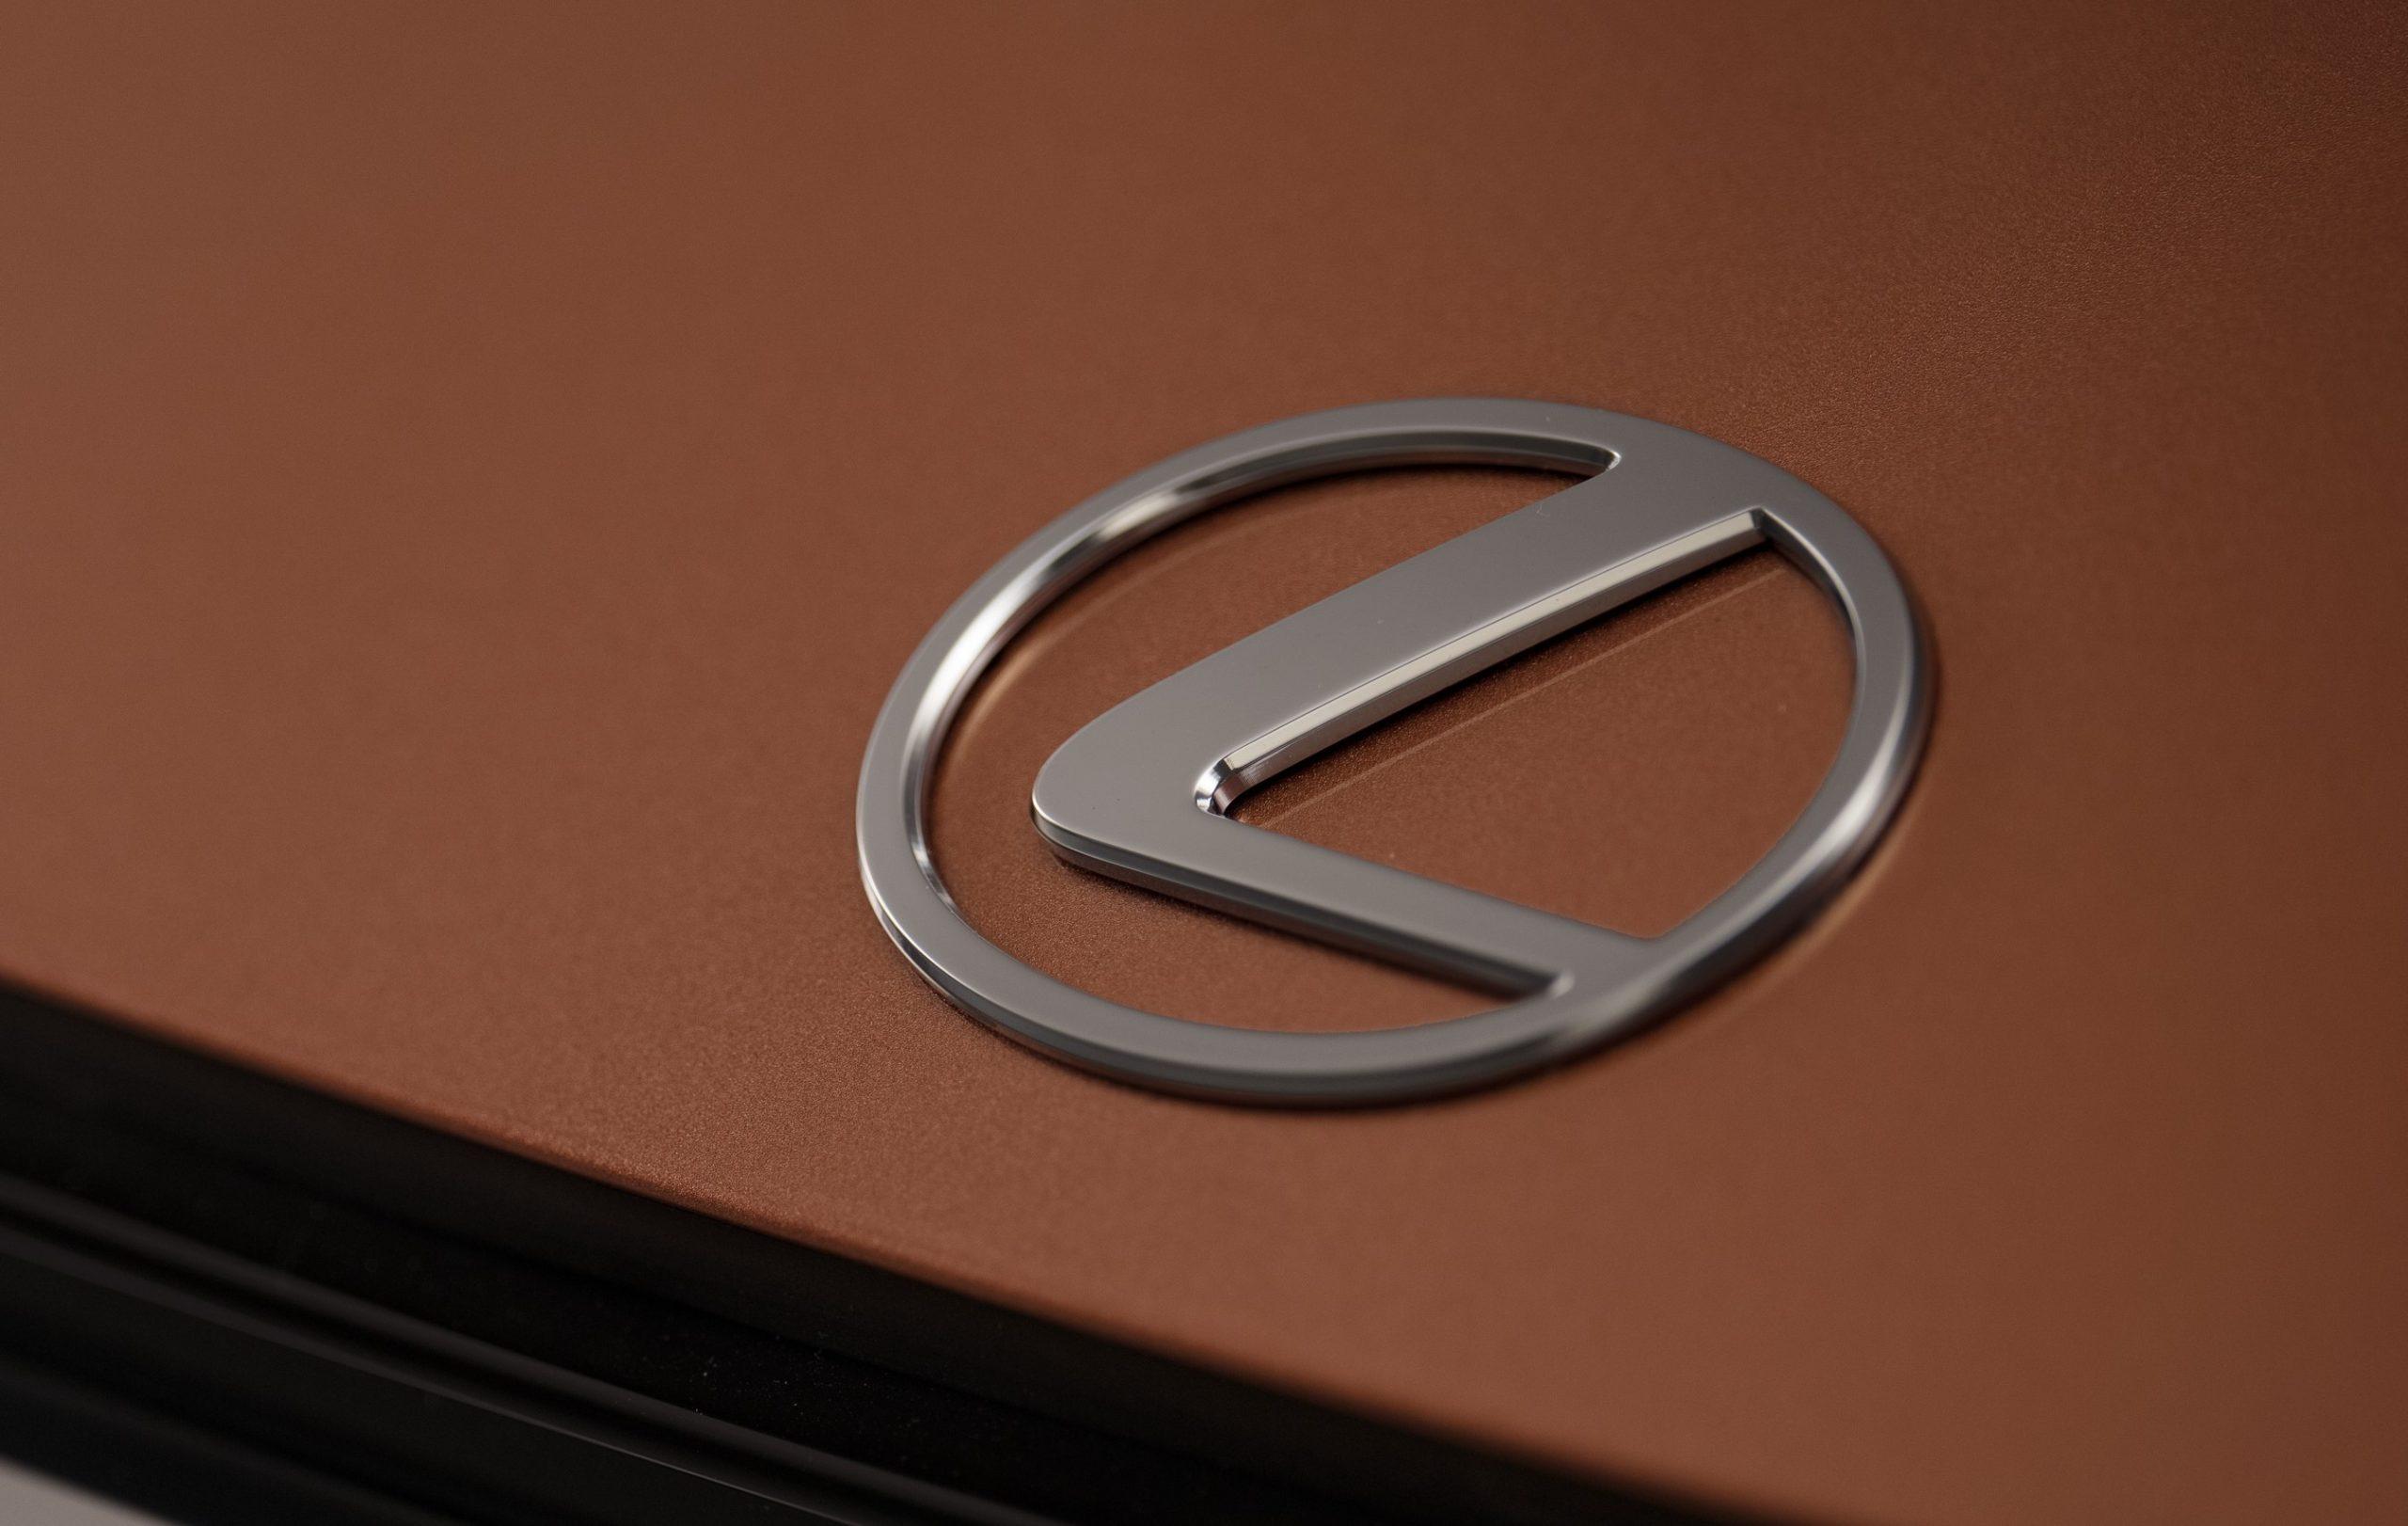 More information about "Lexus achieves record-breaking UK sales"